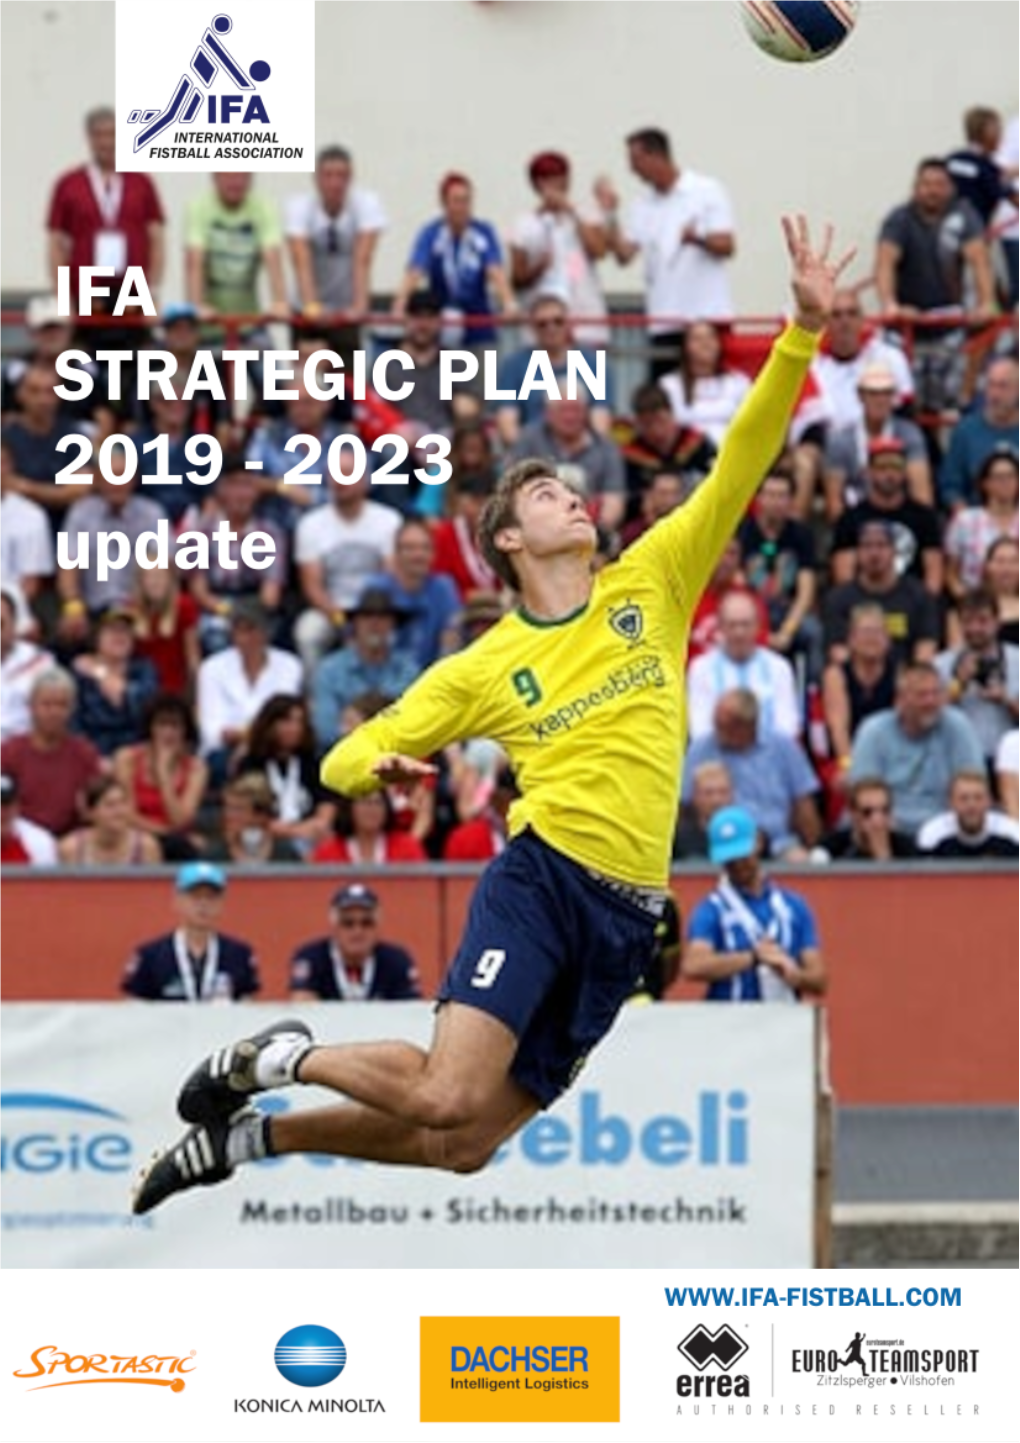 The IFA 2019-2023 Strategic Plan Can Be Found Here